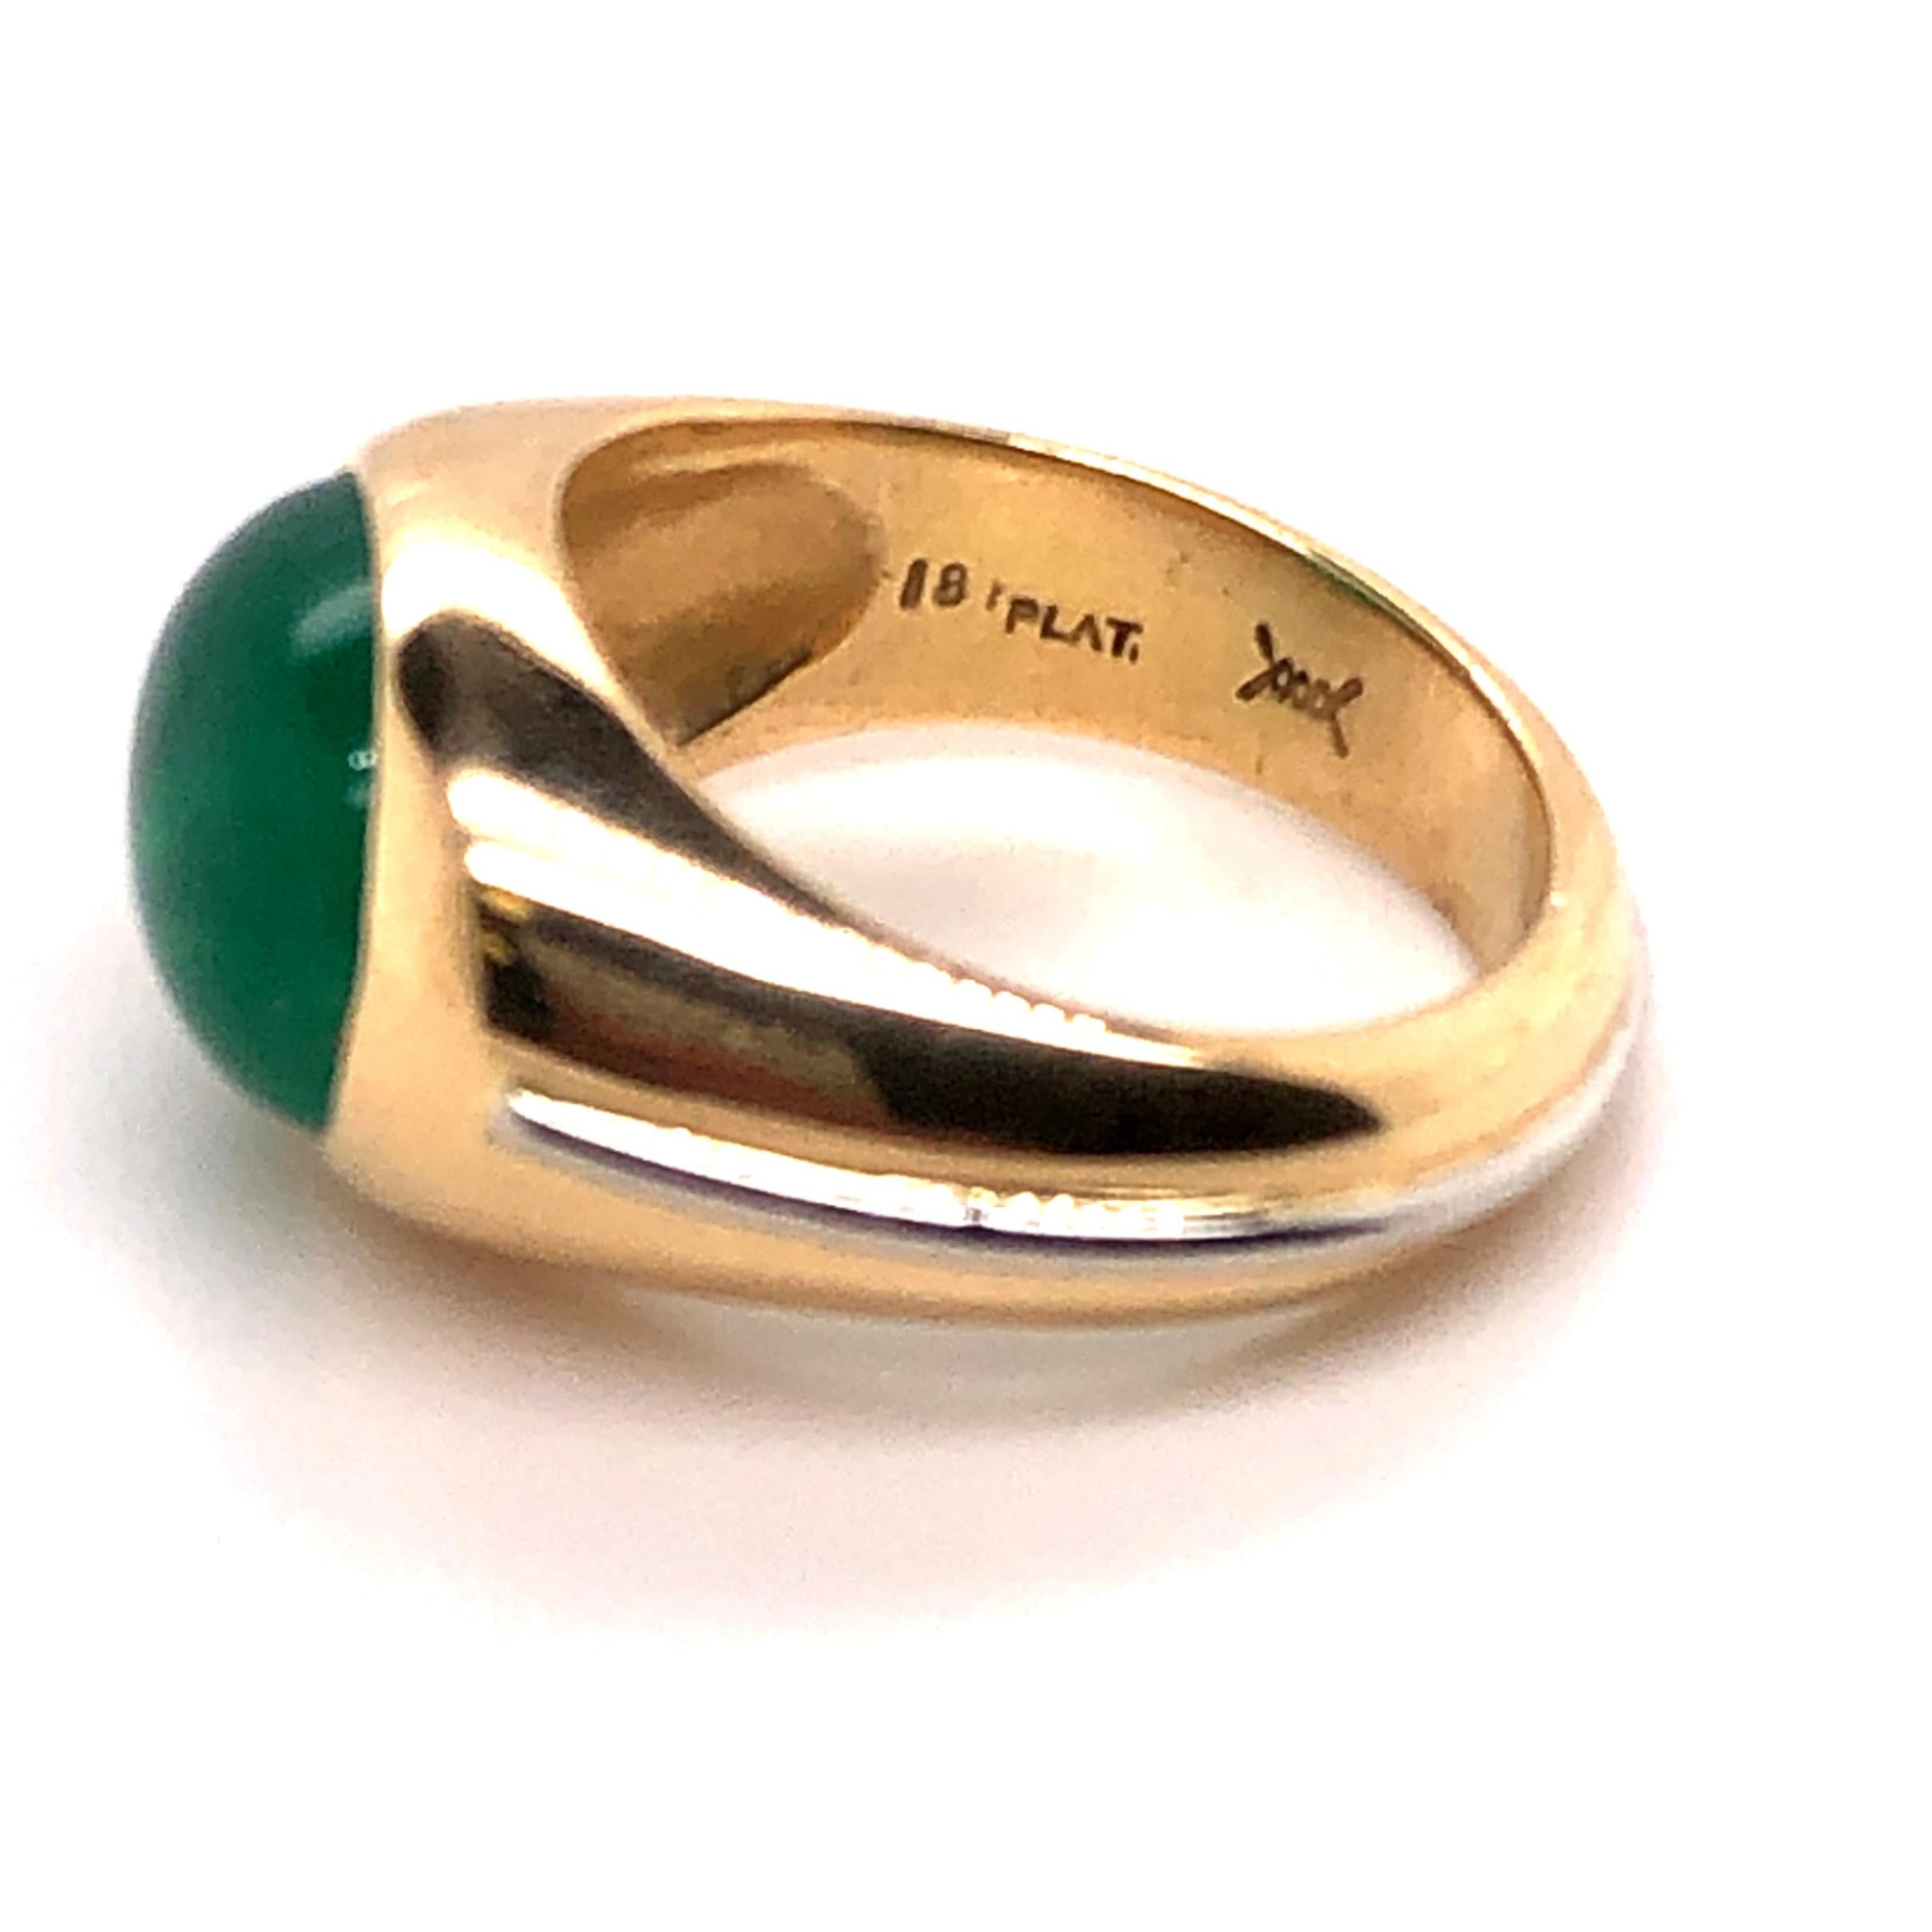 18kt yellow gold ring with a platinum racing stripe on the band. This ring contains one center bezel set 5.11 natural AGL certified Colombian emerald cabochon cut emerald. AGL is a world renowned gemological laboratory. This ring comes with the AGL